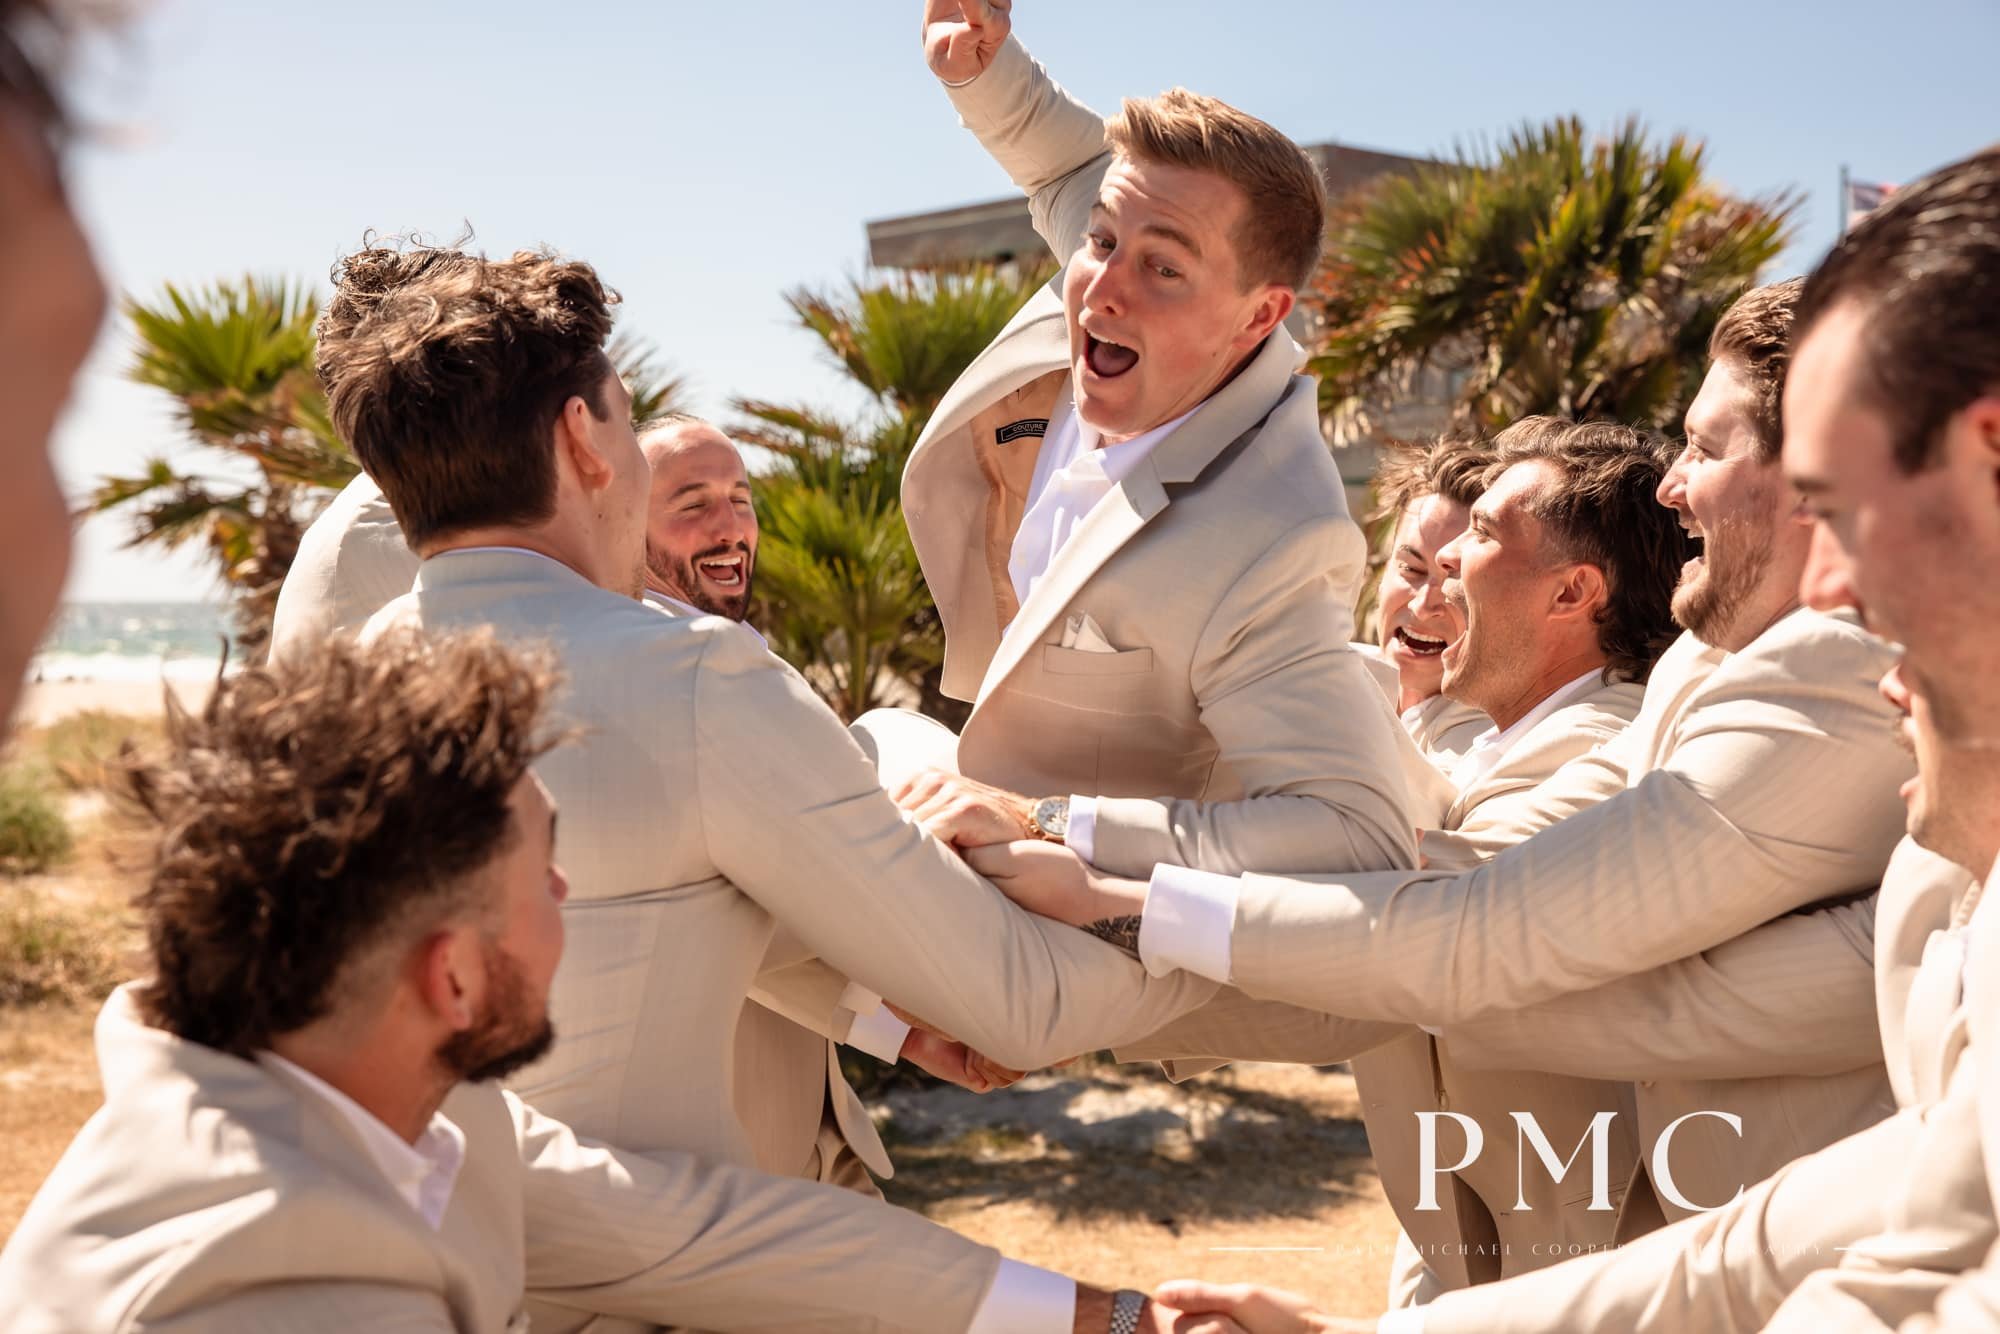 A groom leaps into the arms of his groomsmen at the beach.